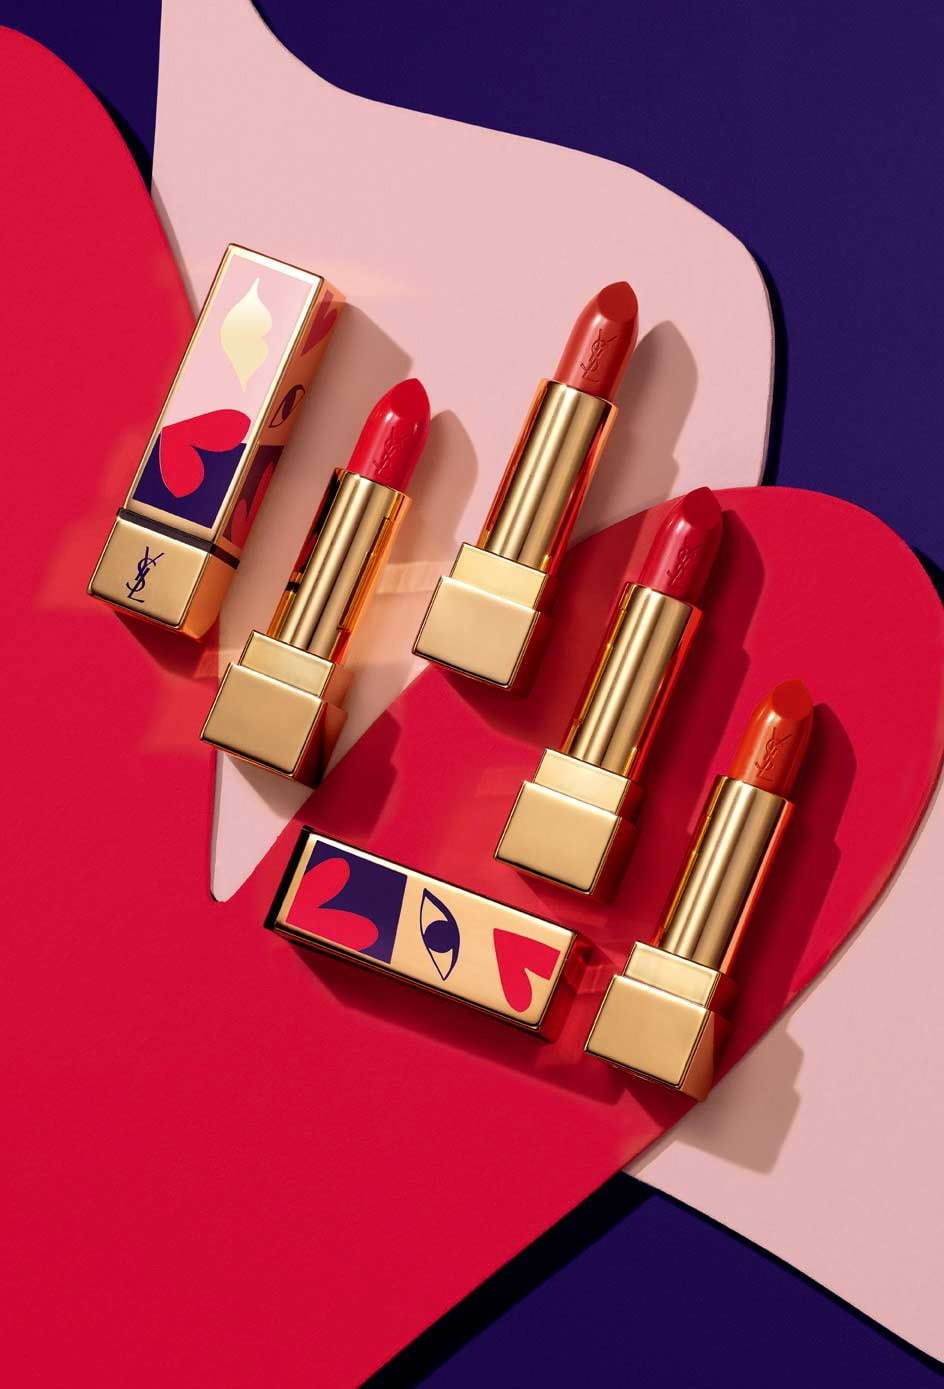 YSL I LOVE YOU SO POP SUMMER 2020 COLLECTION INSPIRED BY POP ART | Chic ...